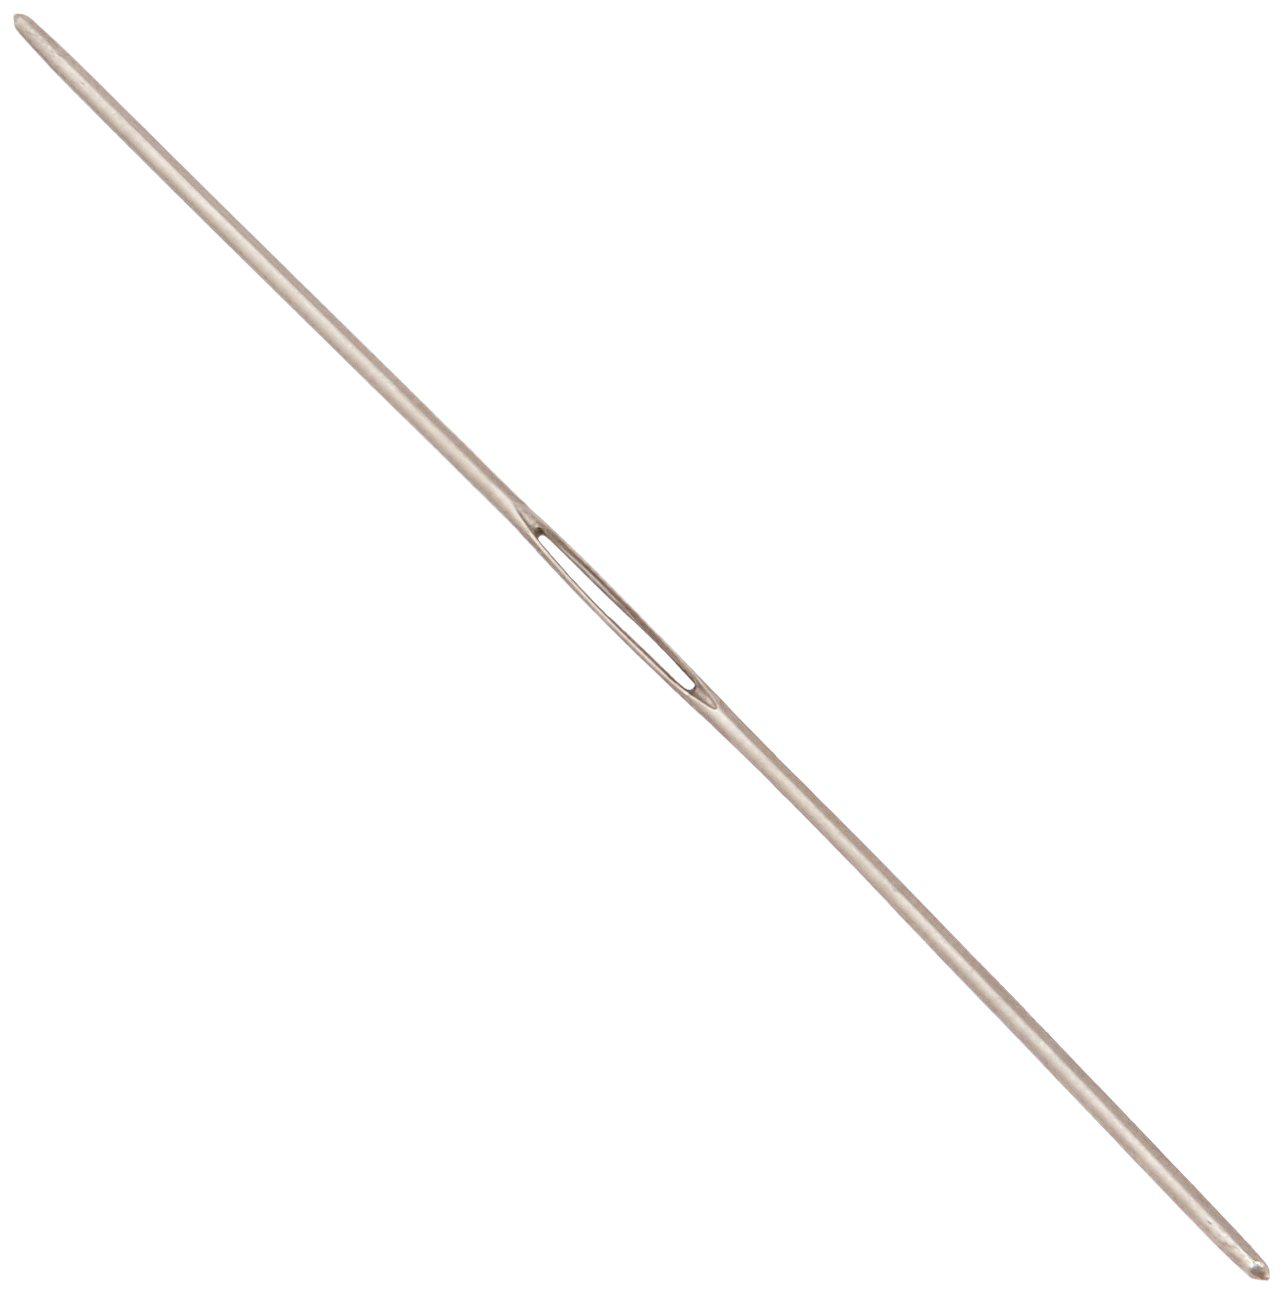 colonial needle jj698-26 twin pointed quick stitch tapestry hand needles, size 26, 3-pack